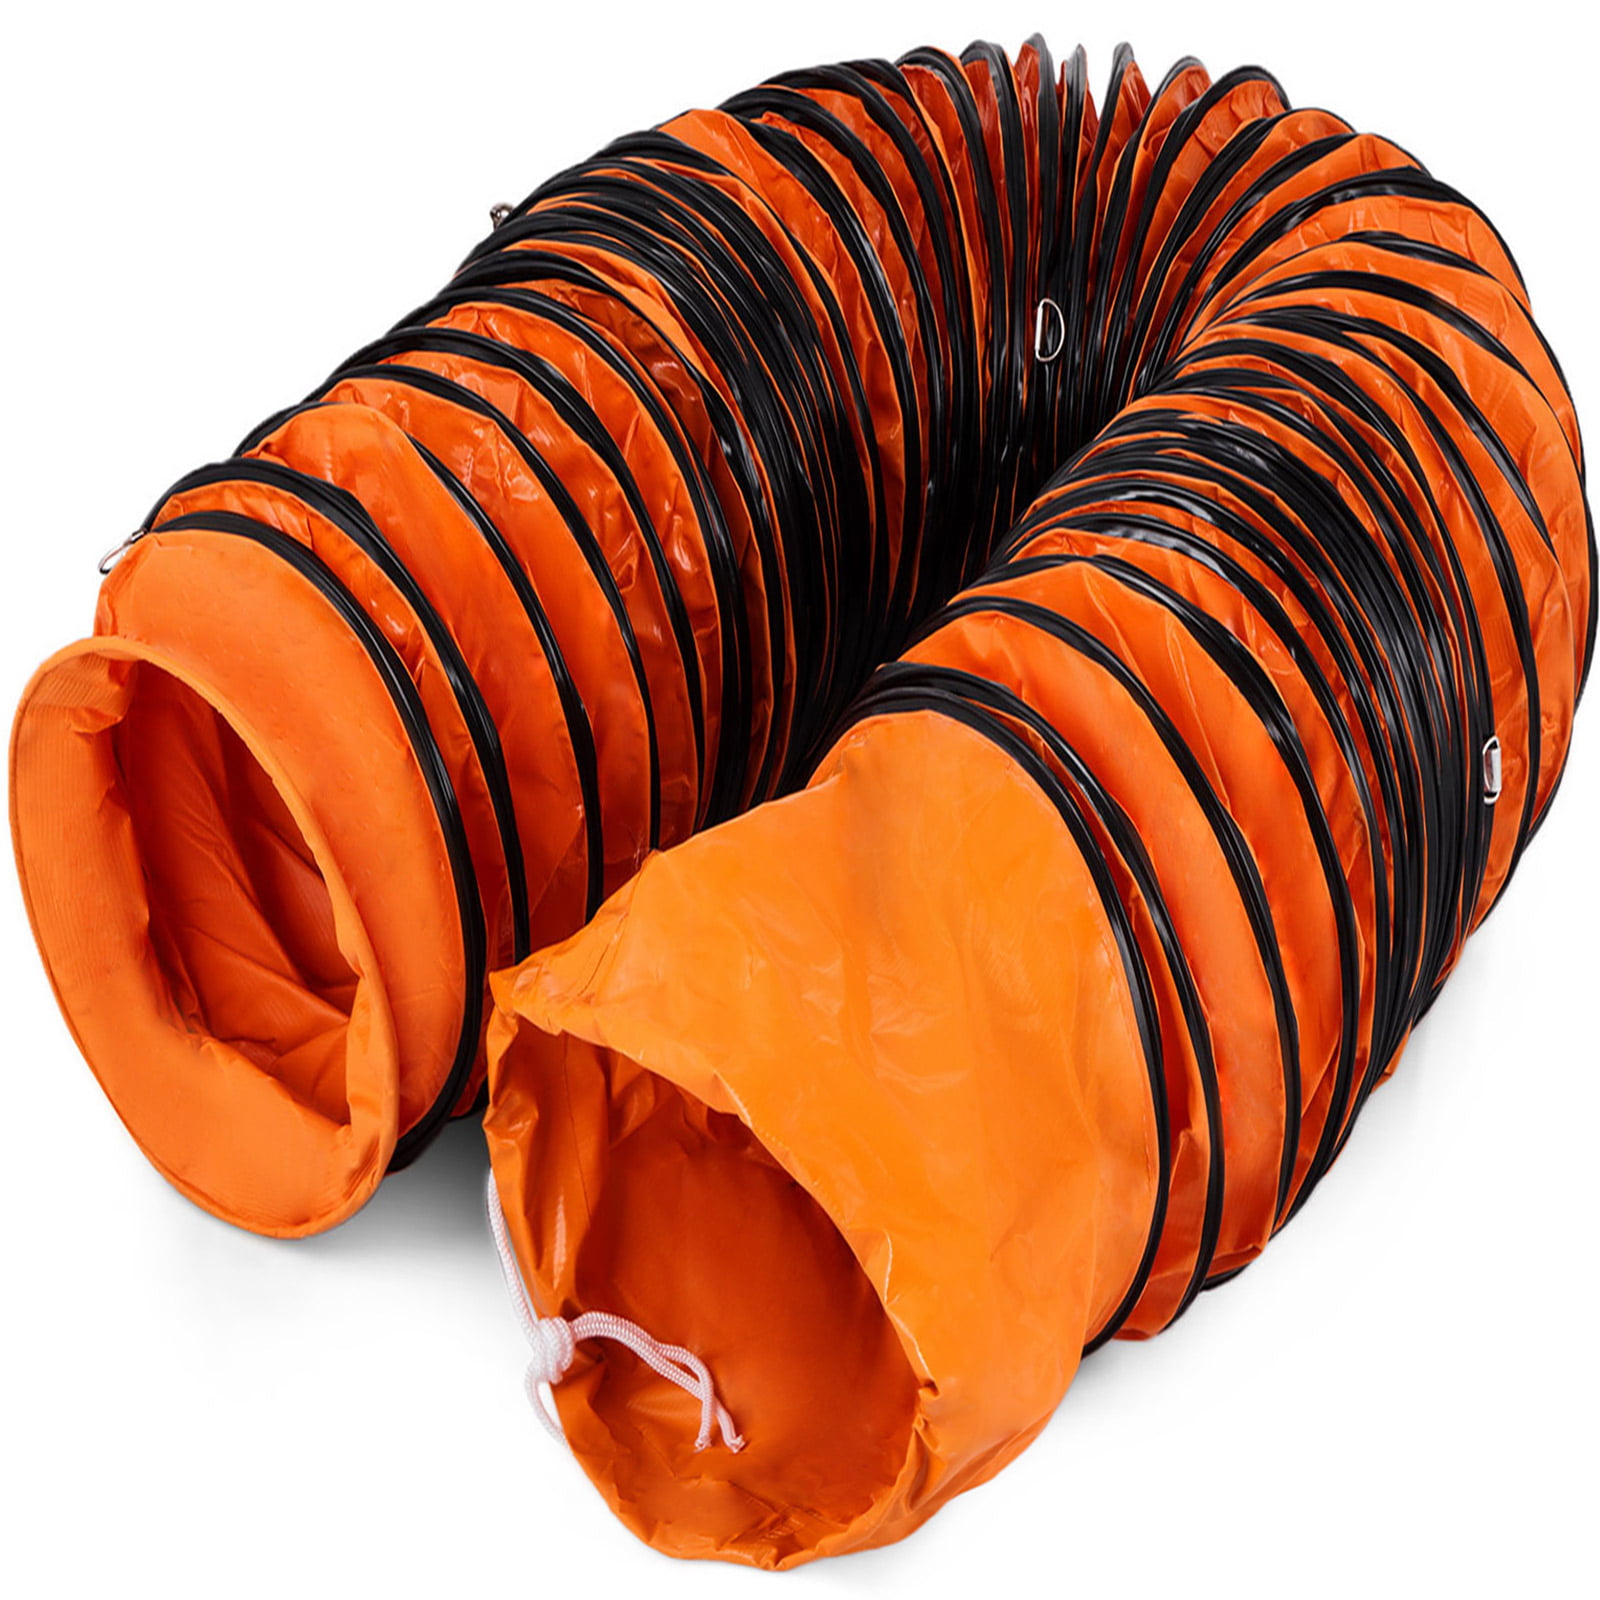 21inch Flexible Duct Hose 25ft Extractor Fan Ducting Hosing Exhaust Ventilation 